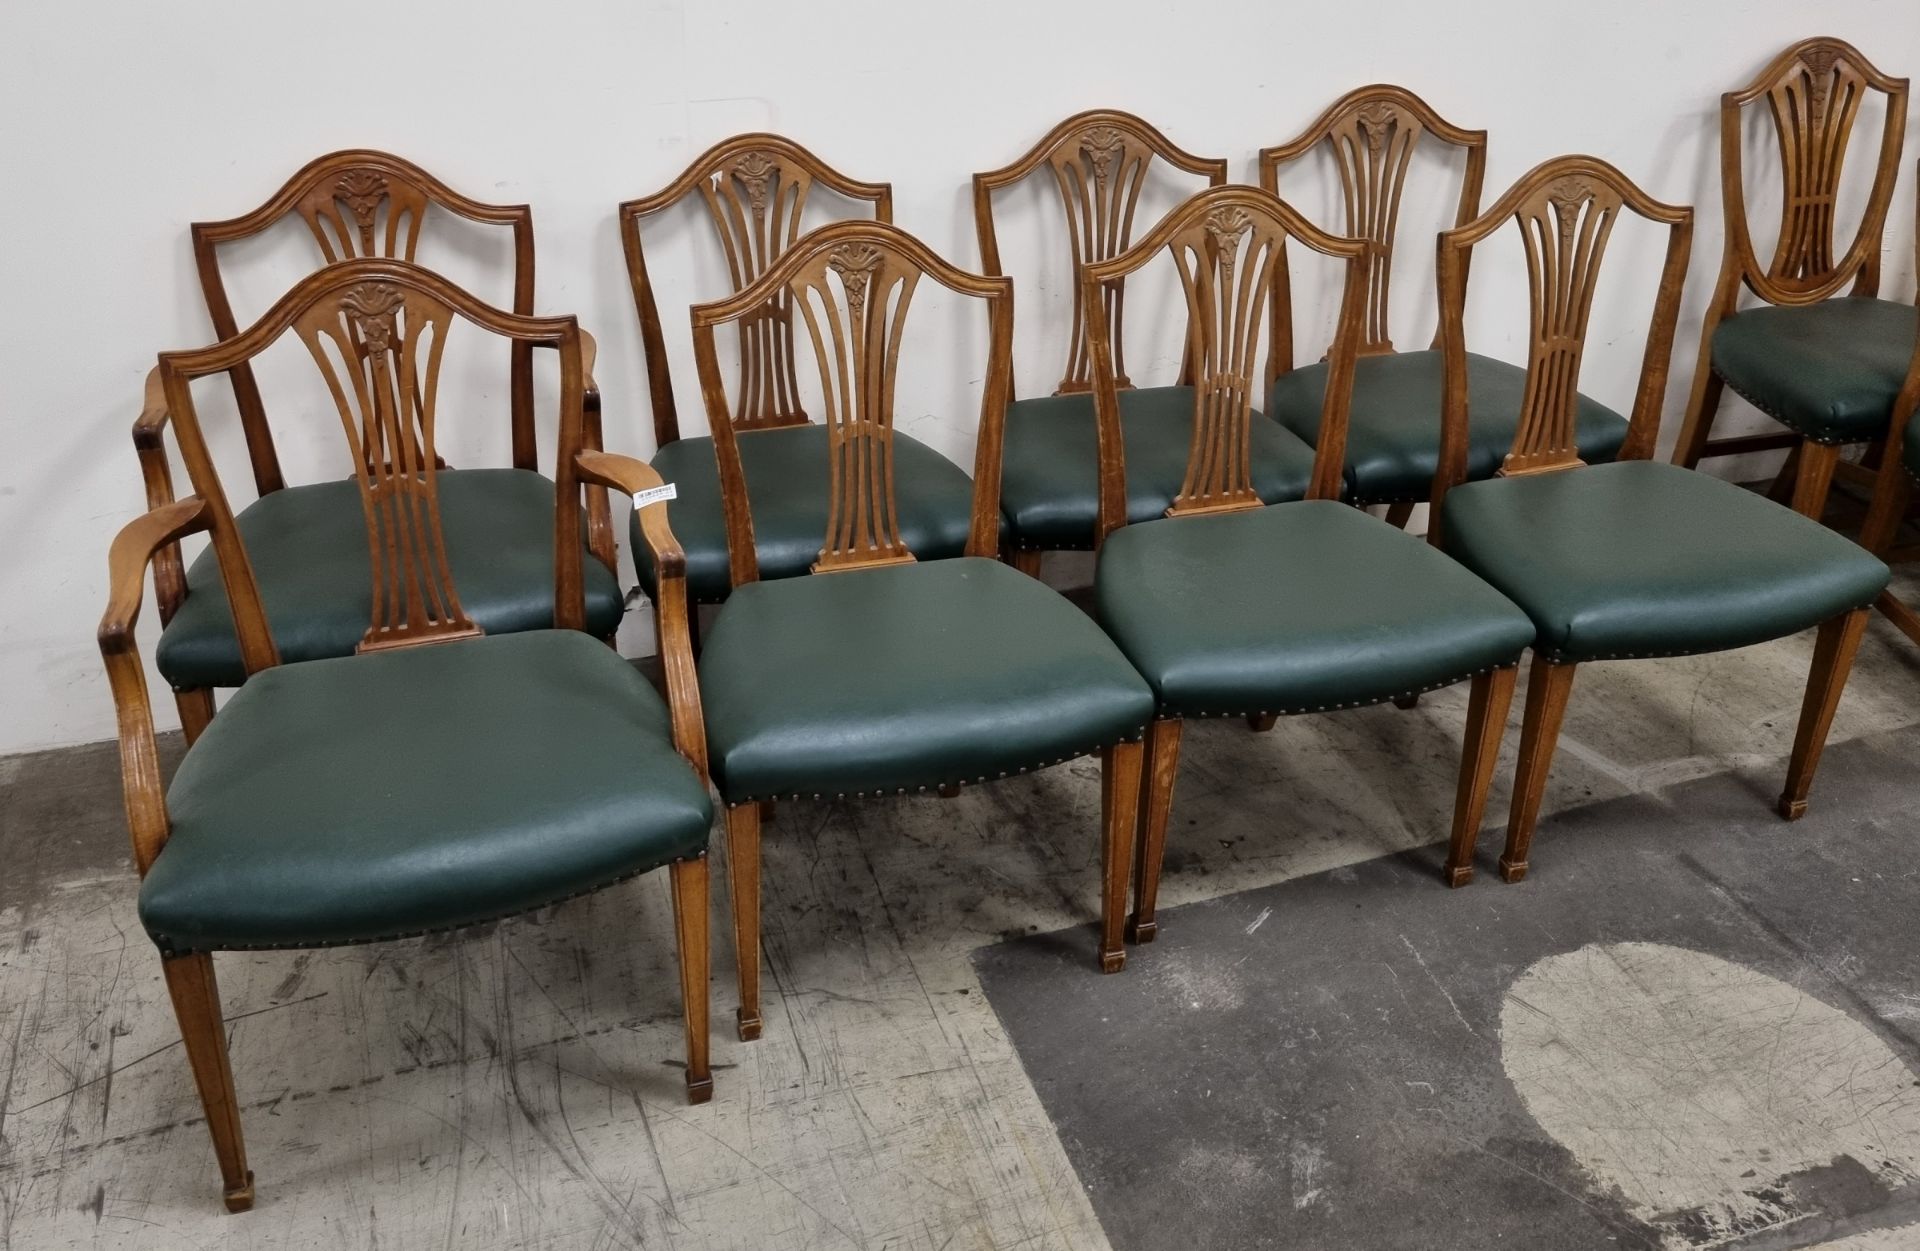 14x 1970 - 1980's Wooden chairs - Image 2 of 10